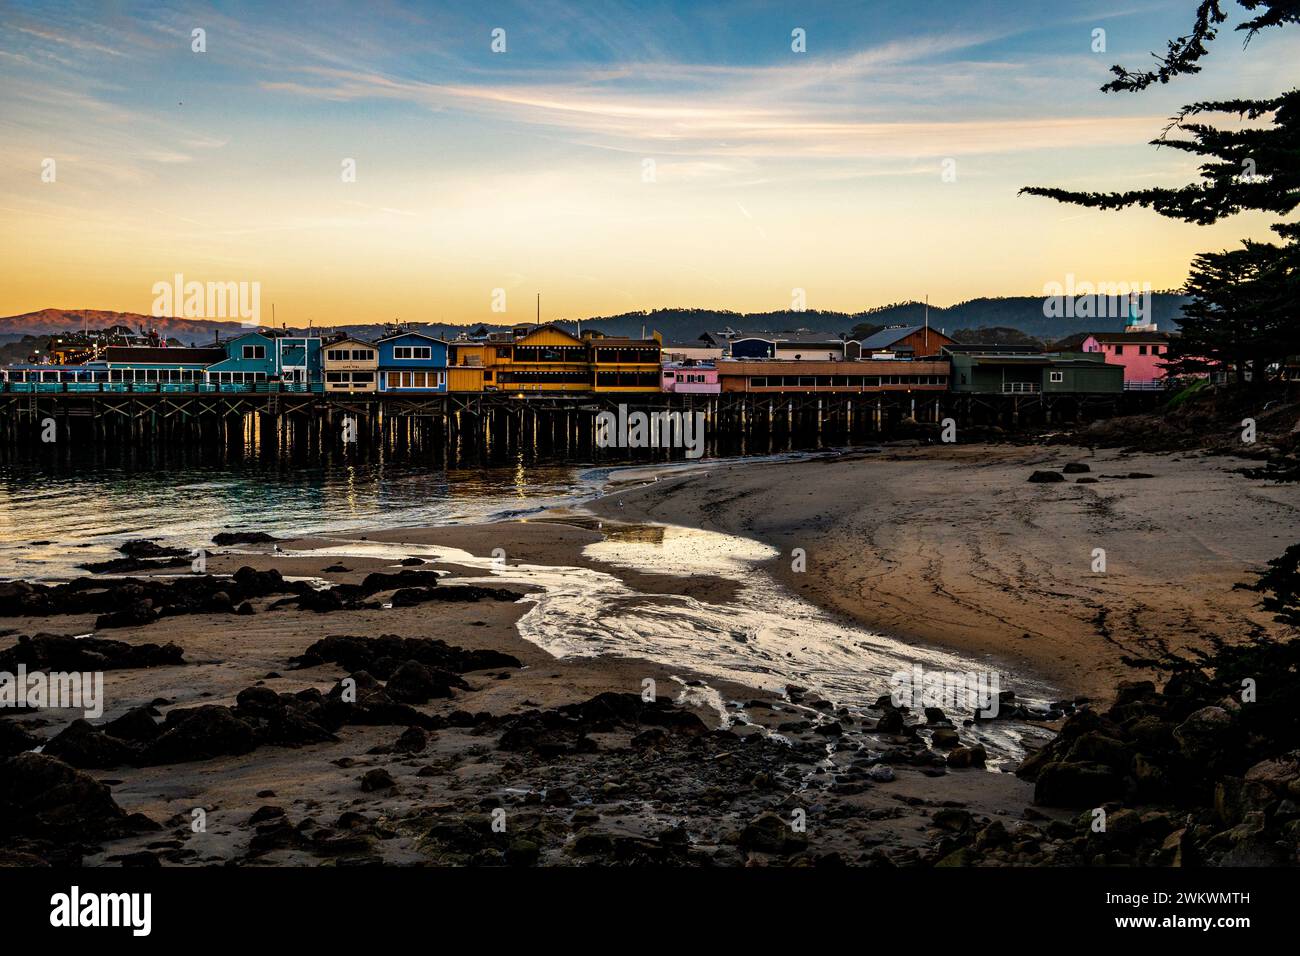 Sunset and low tide at Montetey, CA's Old Fisherman's Wharf Stock Photo